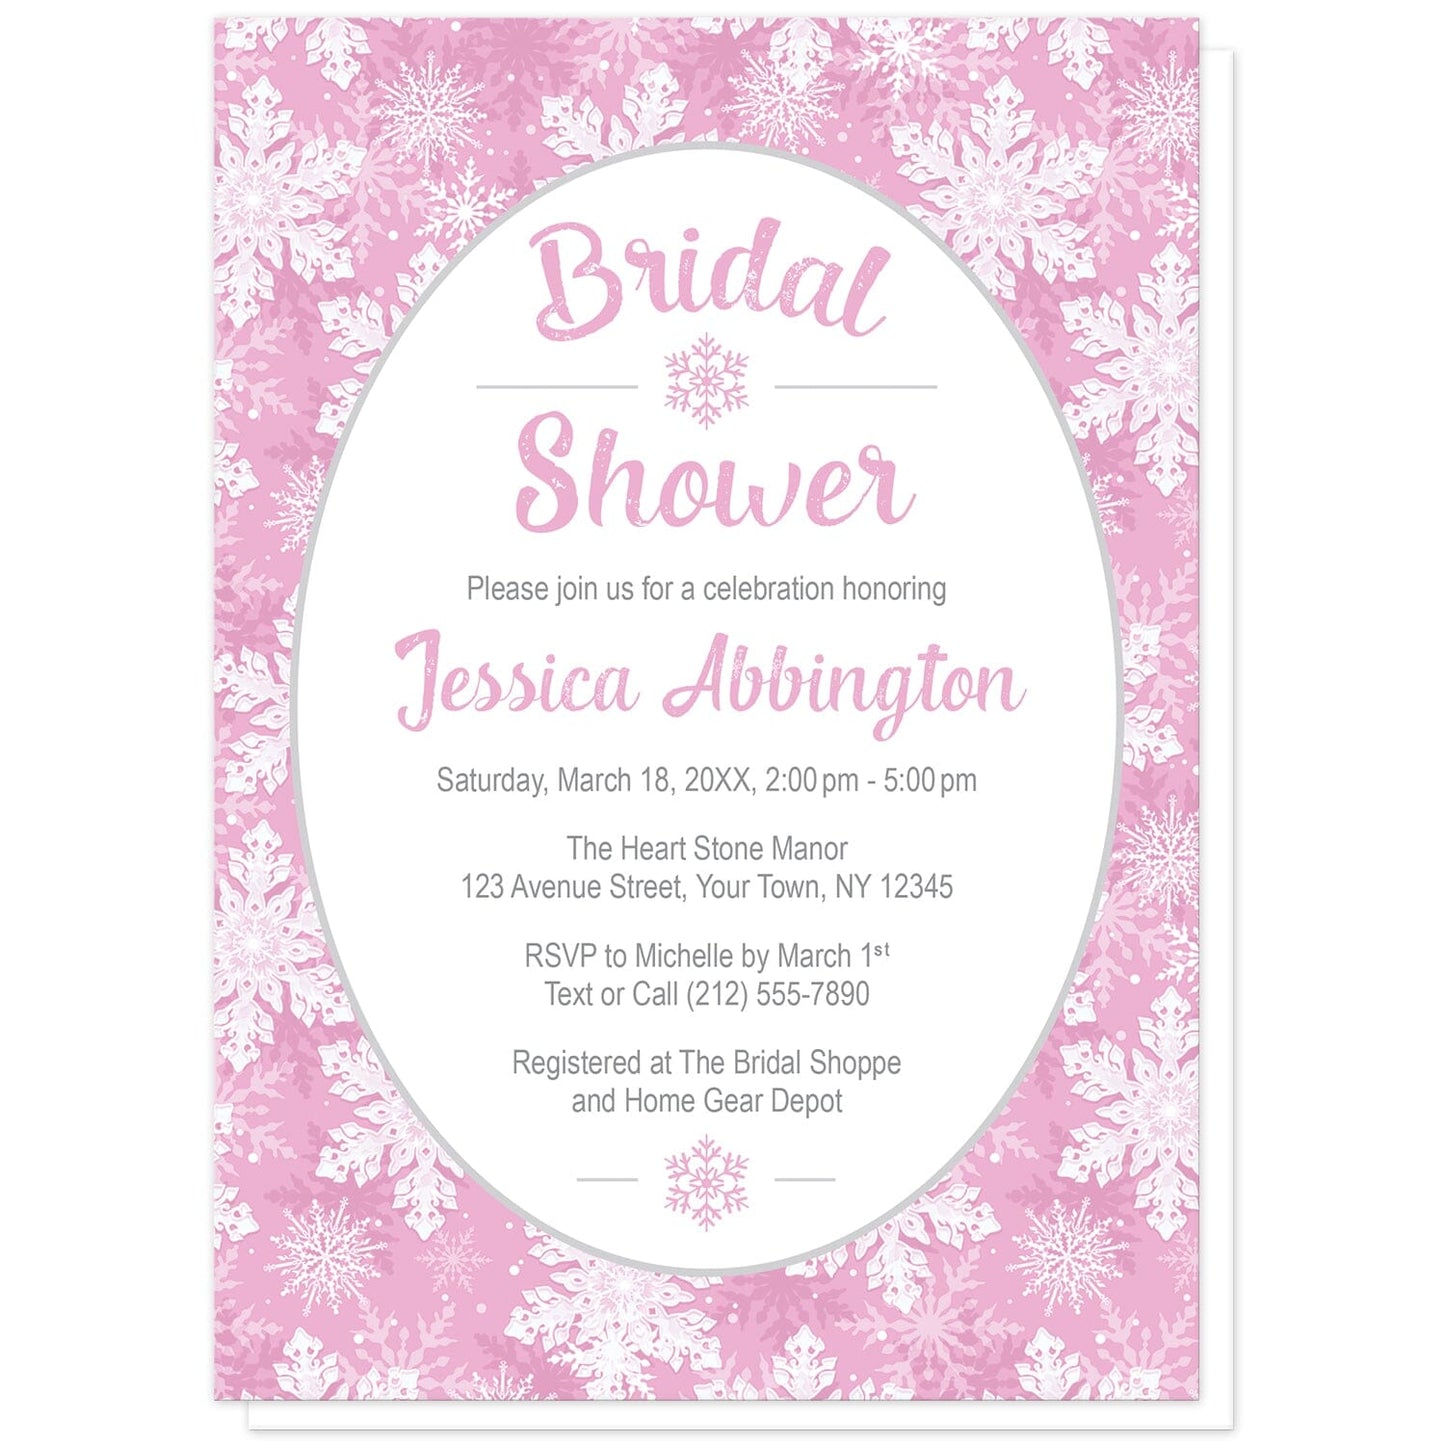 Pink Snowflake Bridal Shower Invitations at Artistically Invited. Beautifully ornate pink snowflake bridal shower invitations designed with your personalized celebration details custom printed in pink and gray in a white oval frame design over a beautiful and ornate pink and white snowflake pattern background.